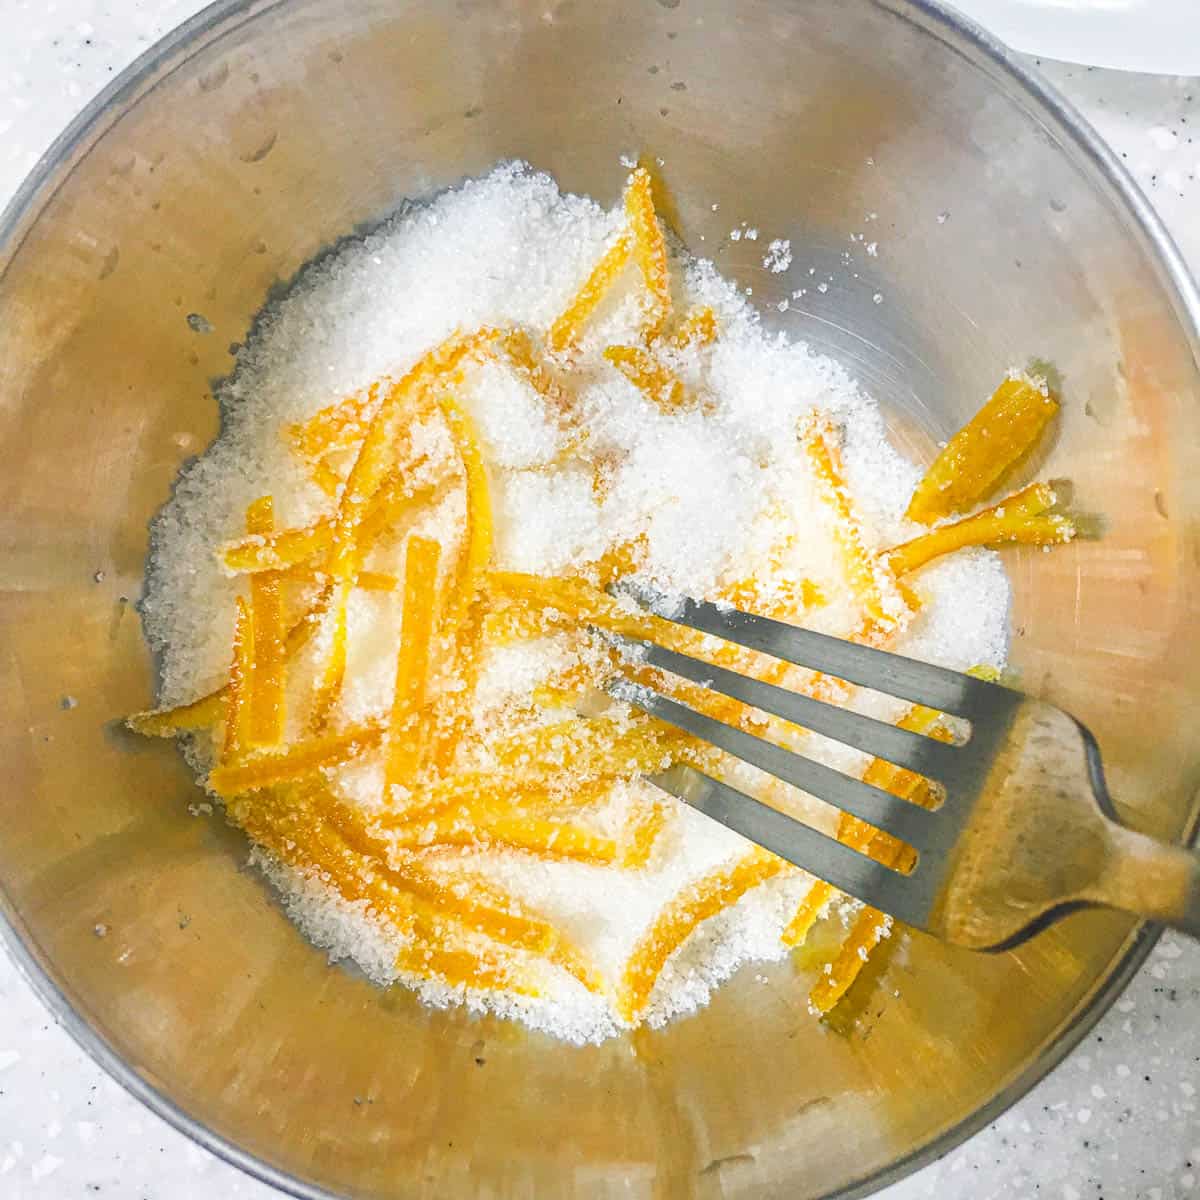 Using a fork to mix orange peel slices in a bowl of sugar